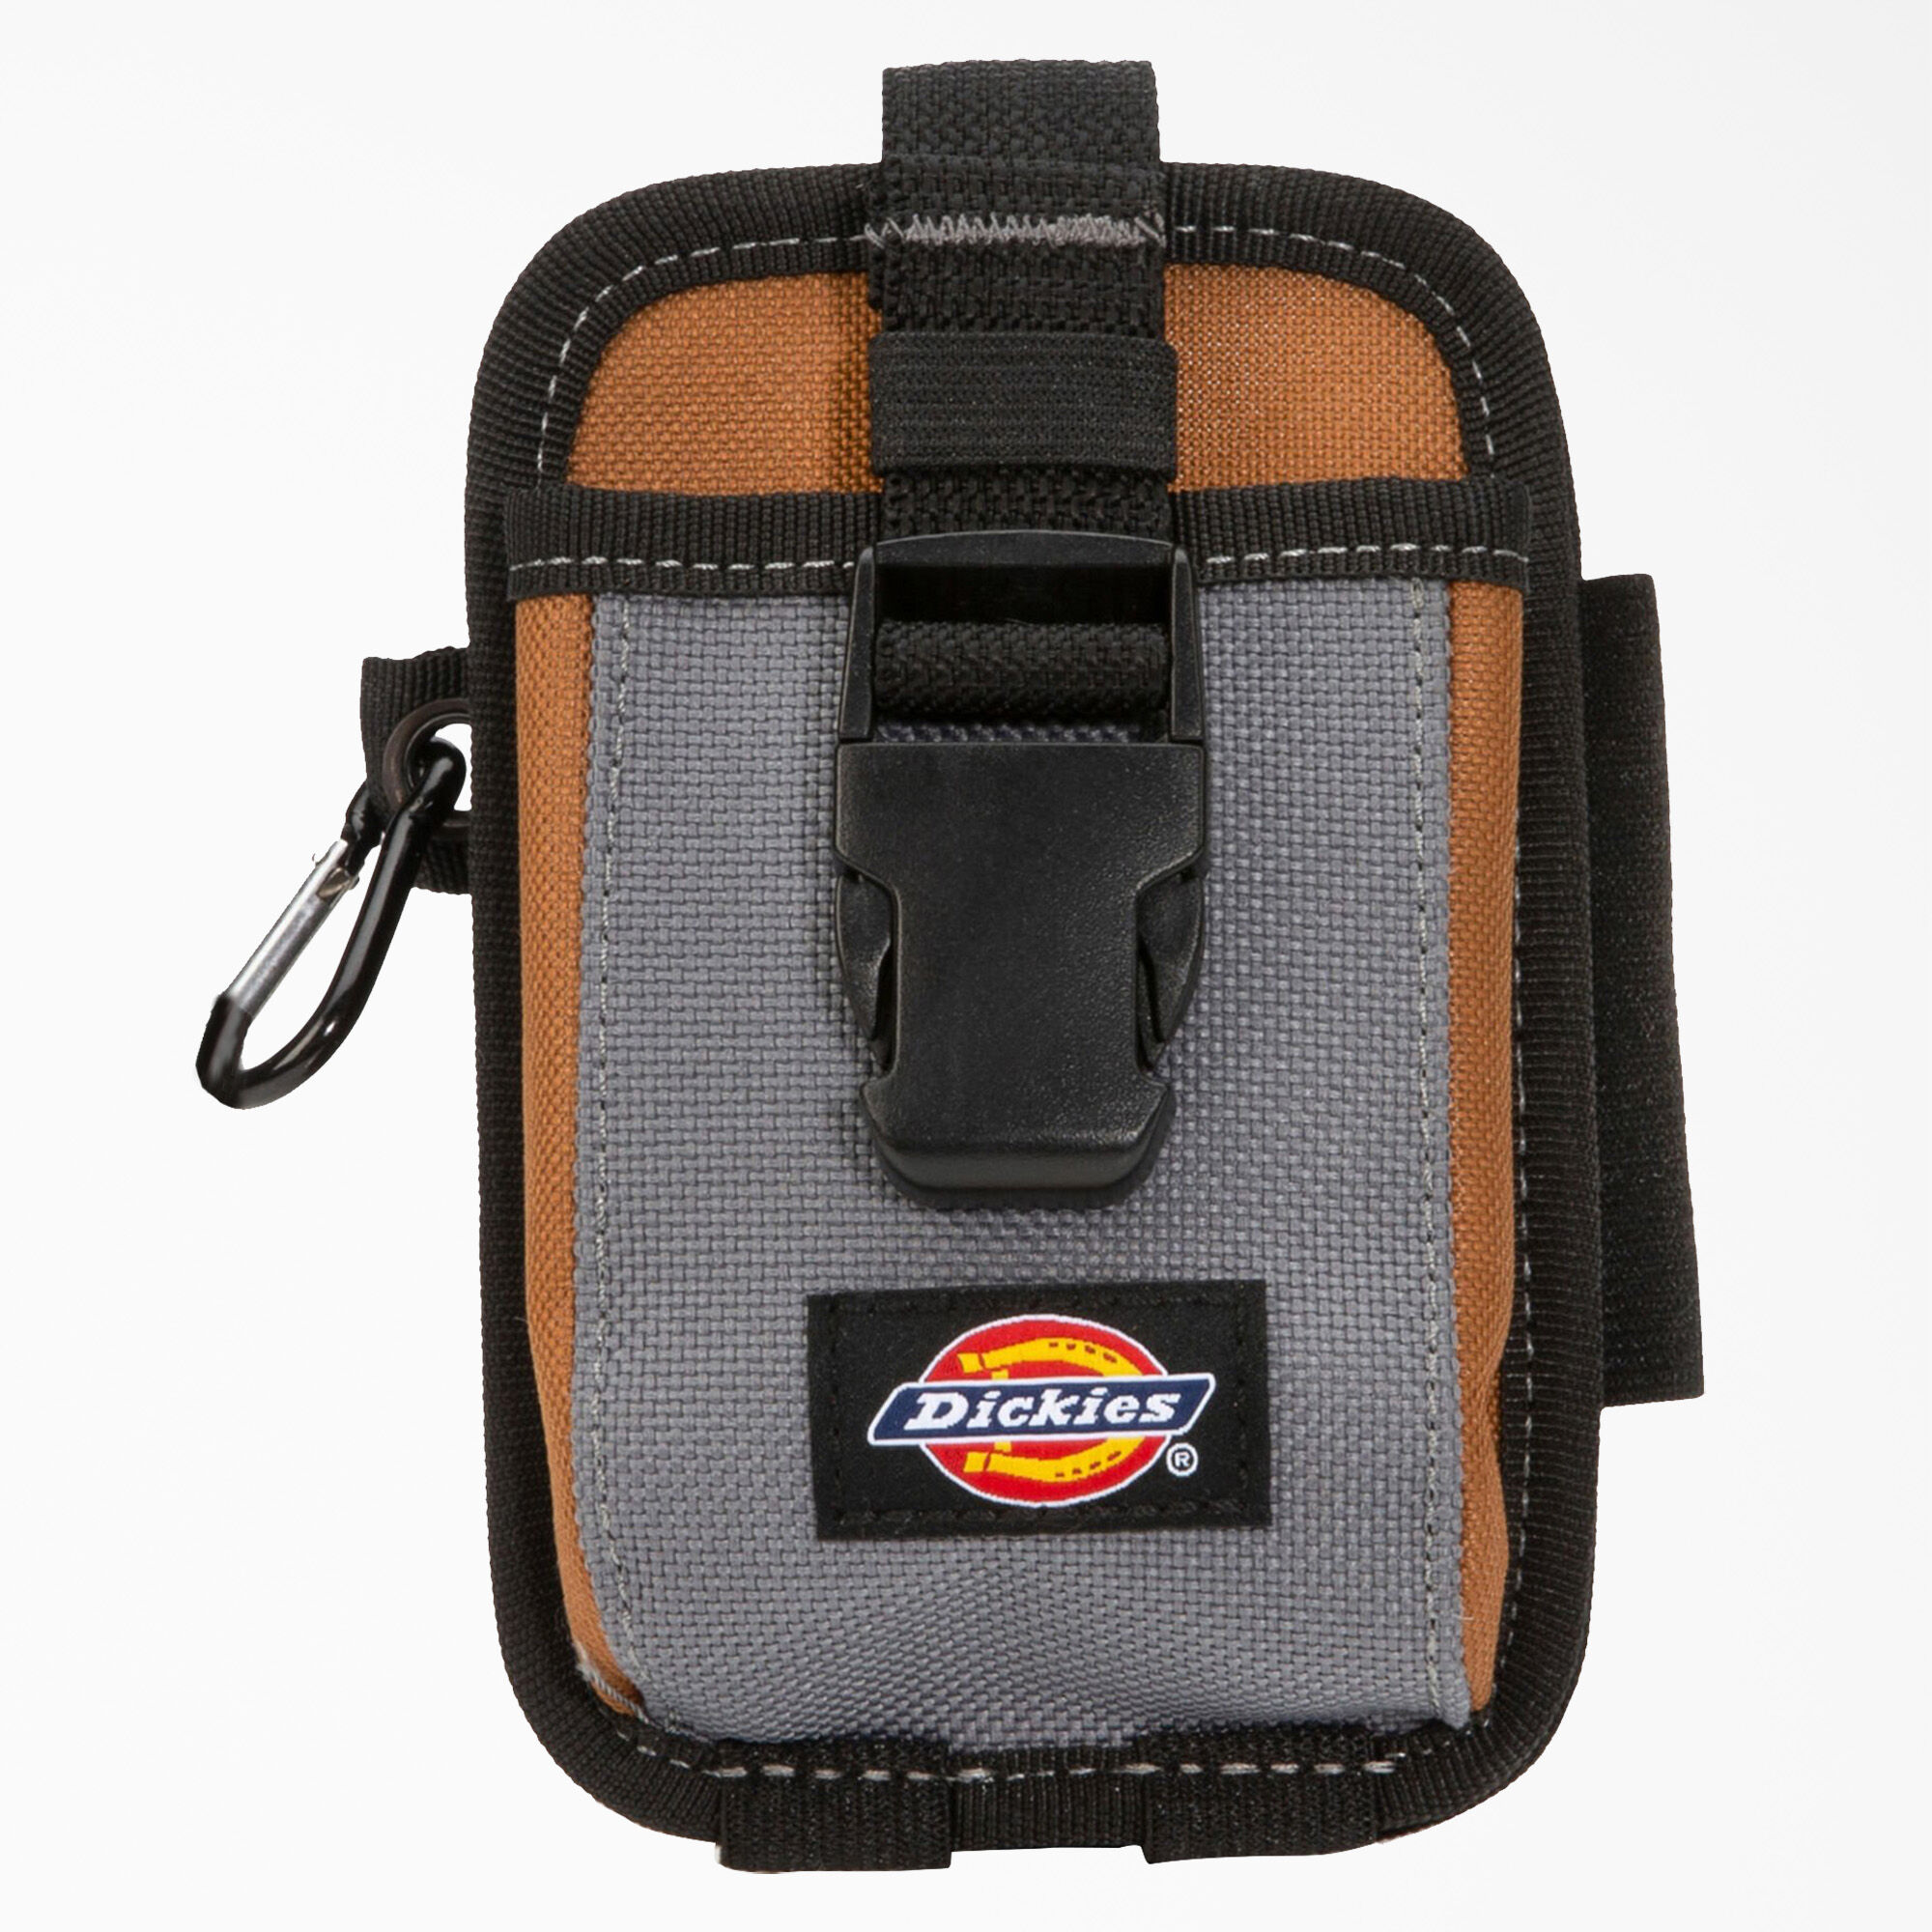 Dickies Work Gear Roll Up Wrench Pouch Holder Case Storage Fold Over Bag Snap On 